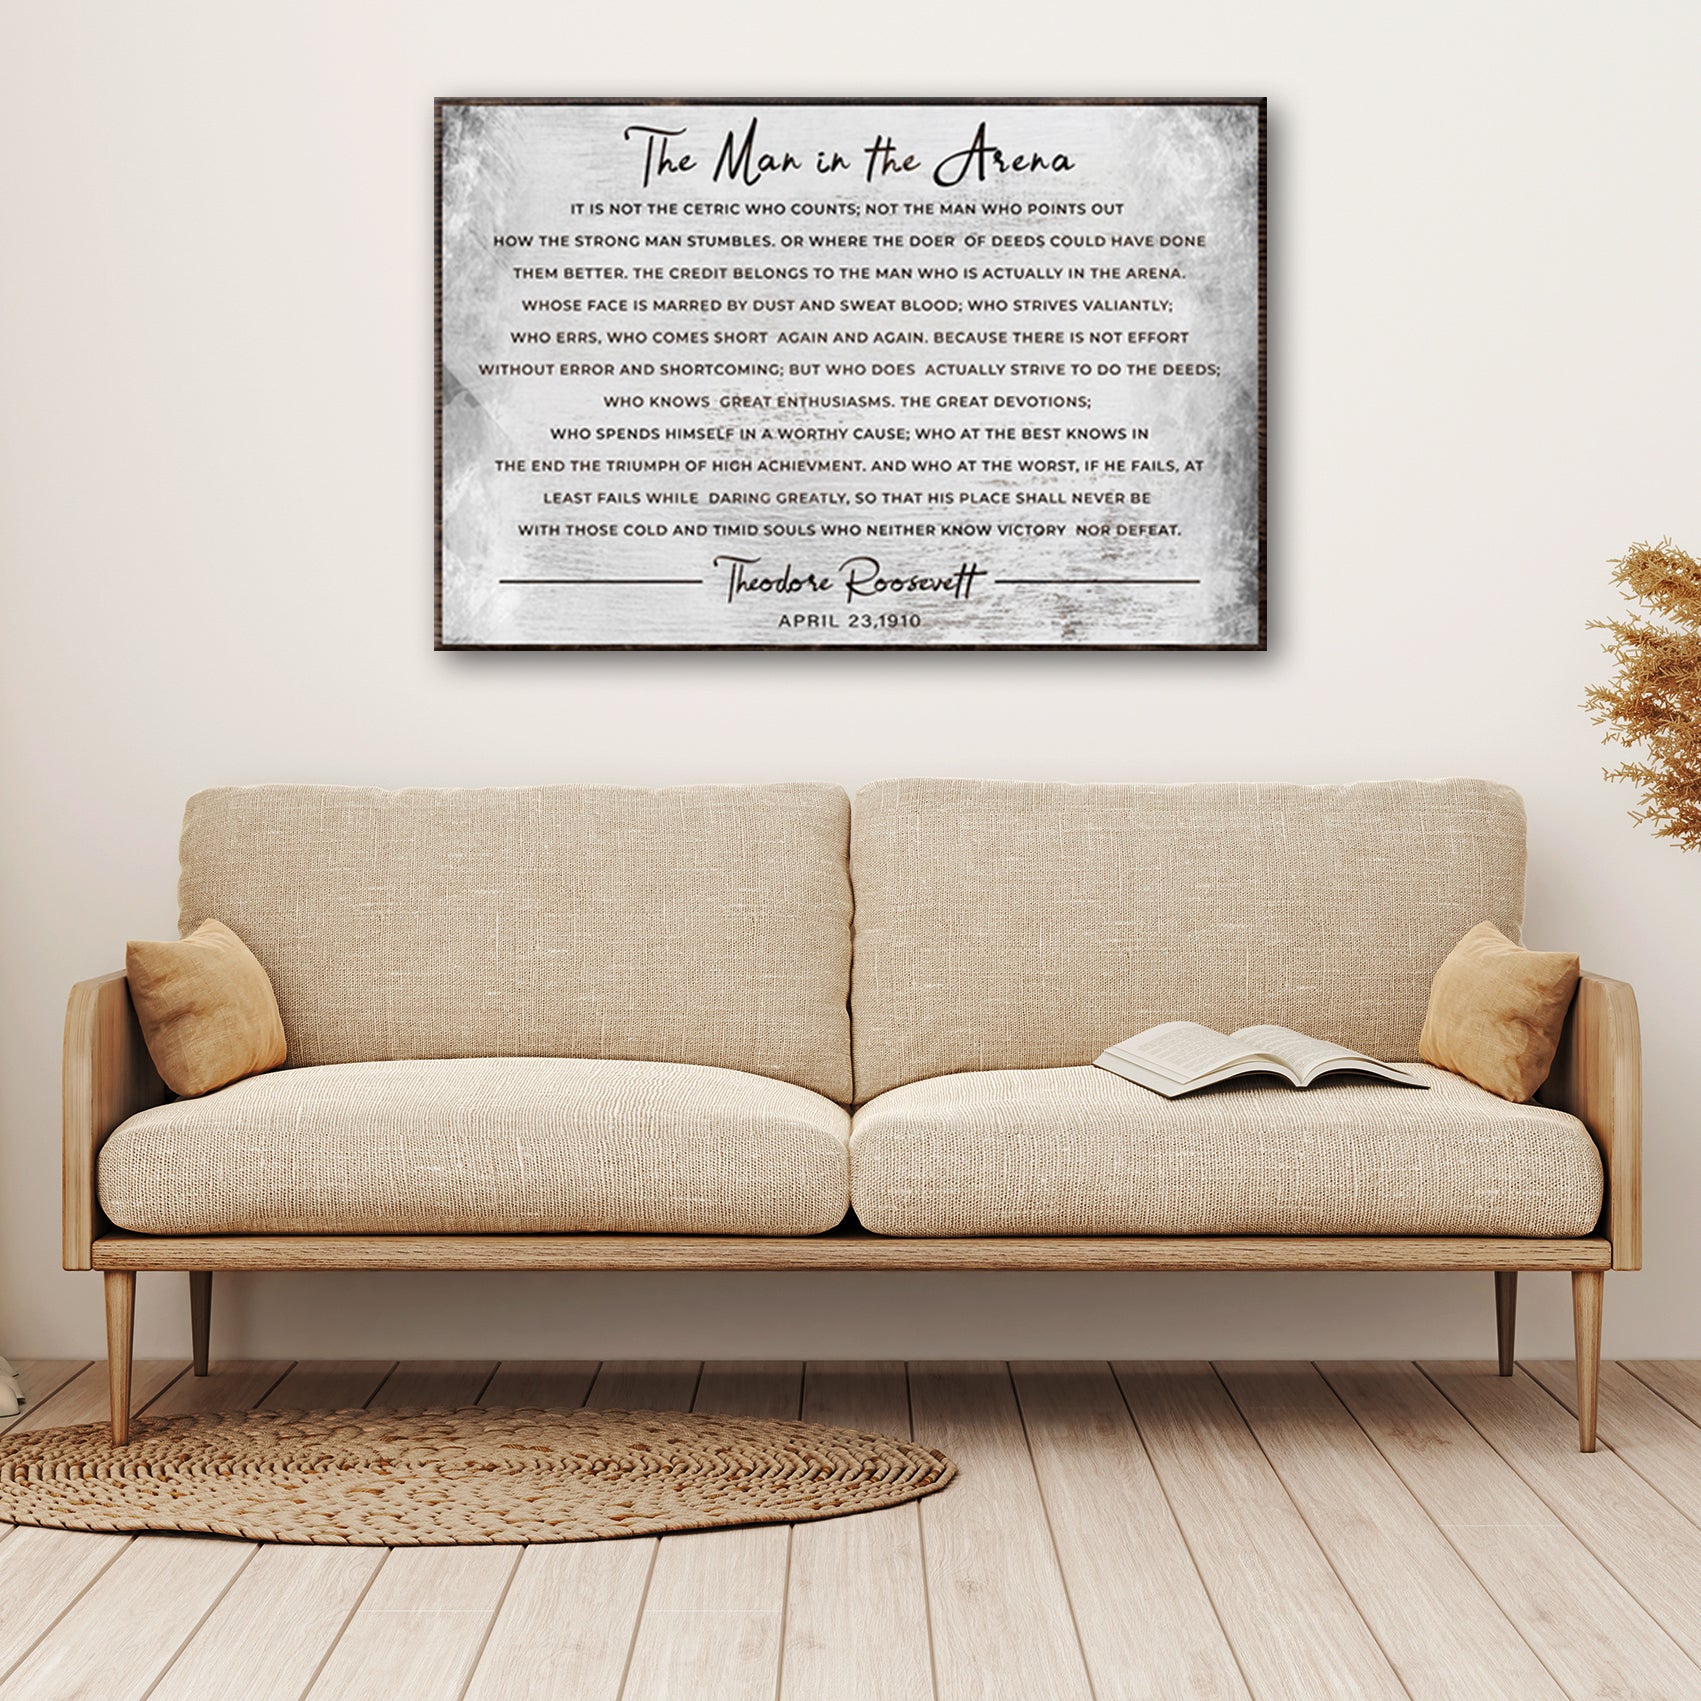 The Man in the Arena Grunge Sign - Image by Tailored Canvases